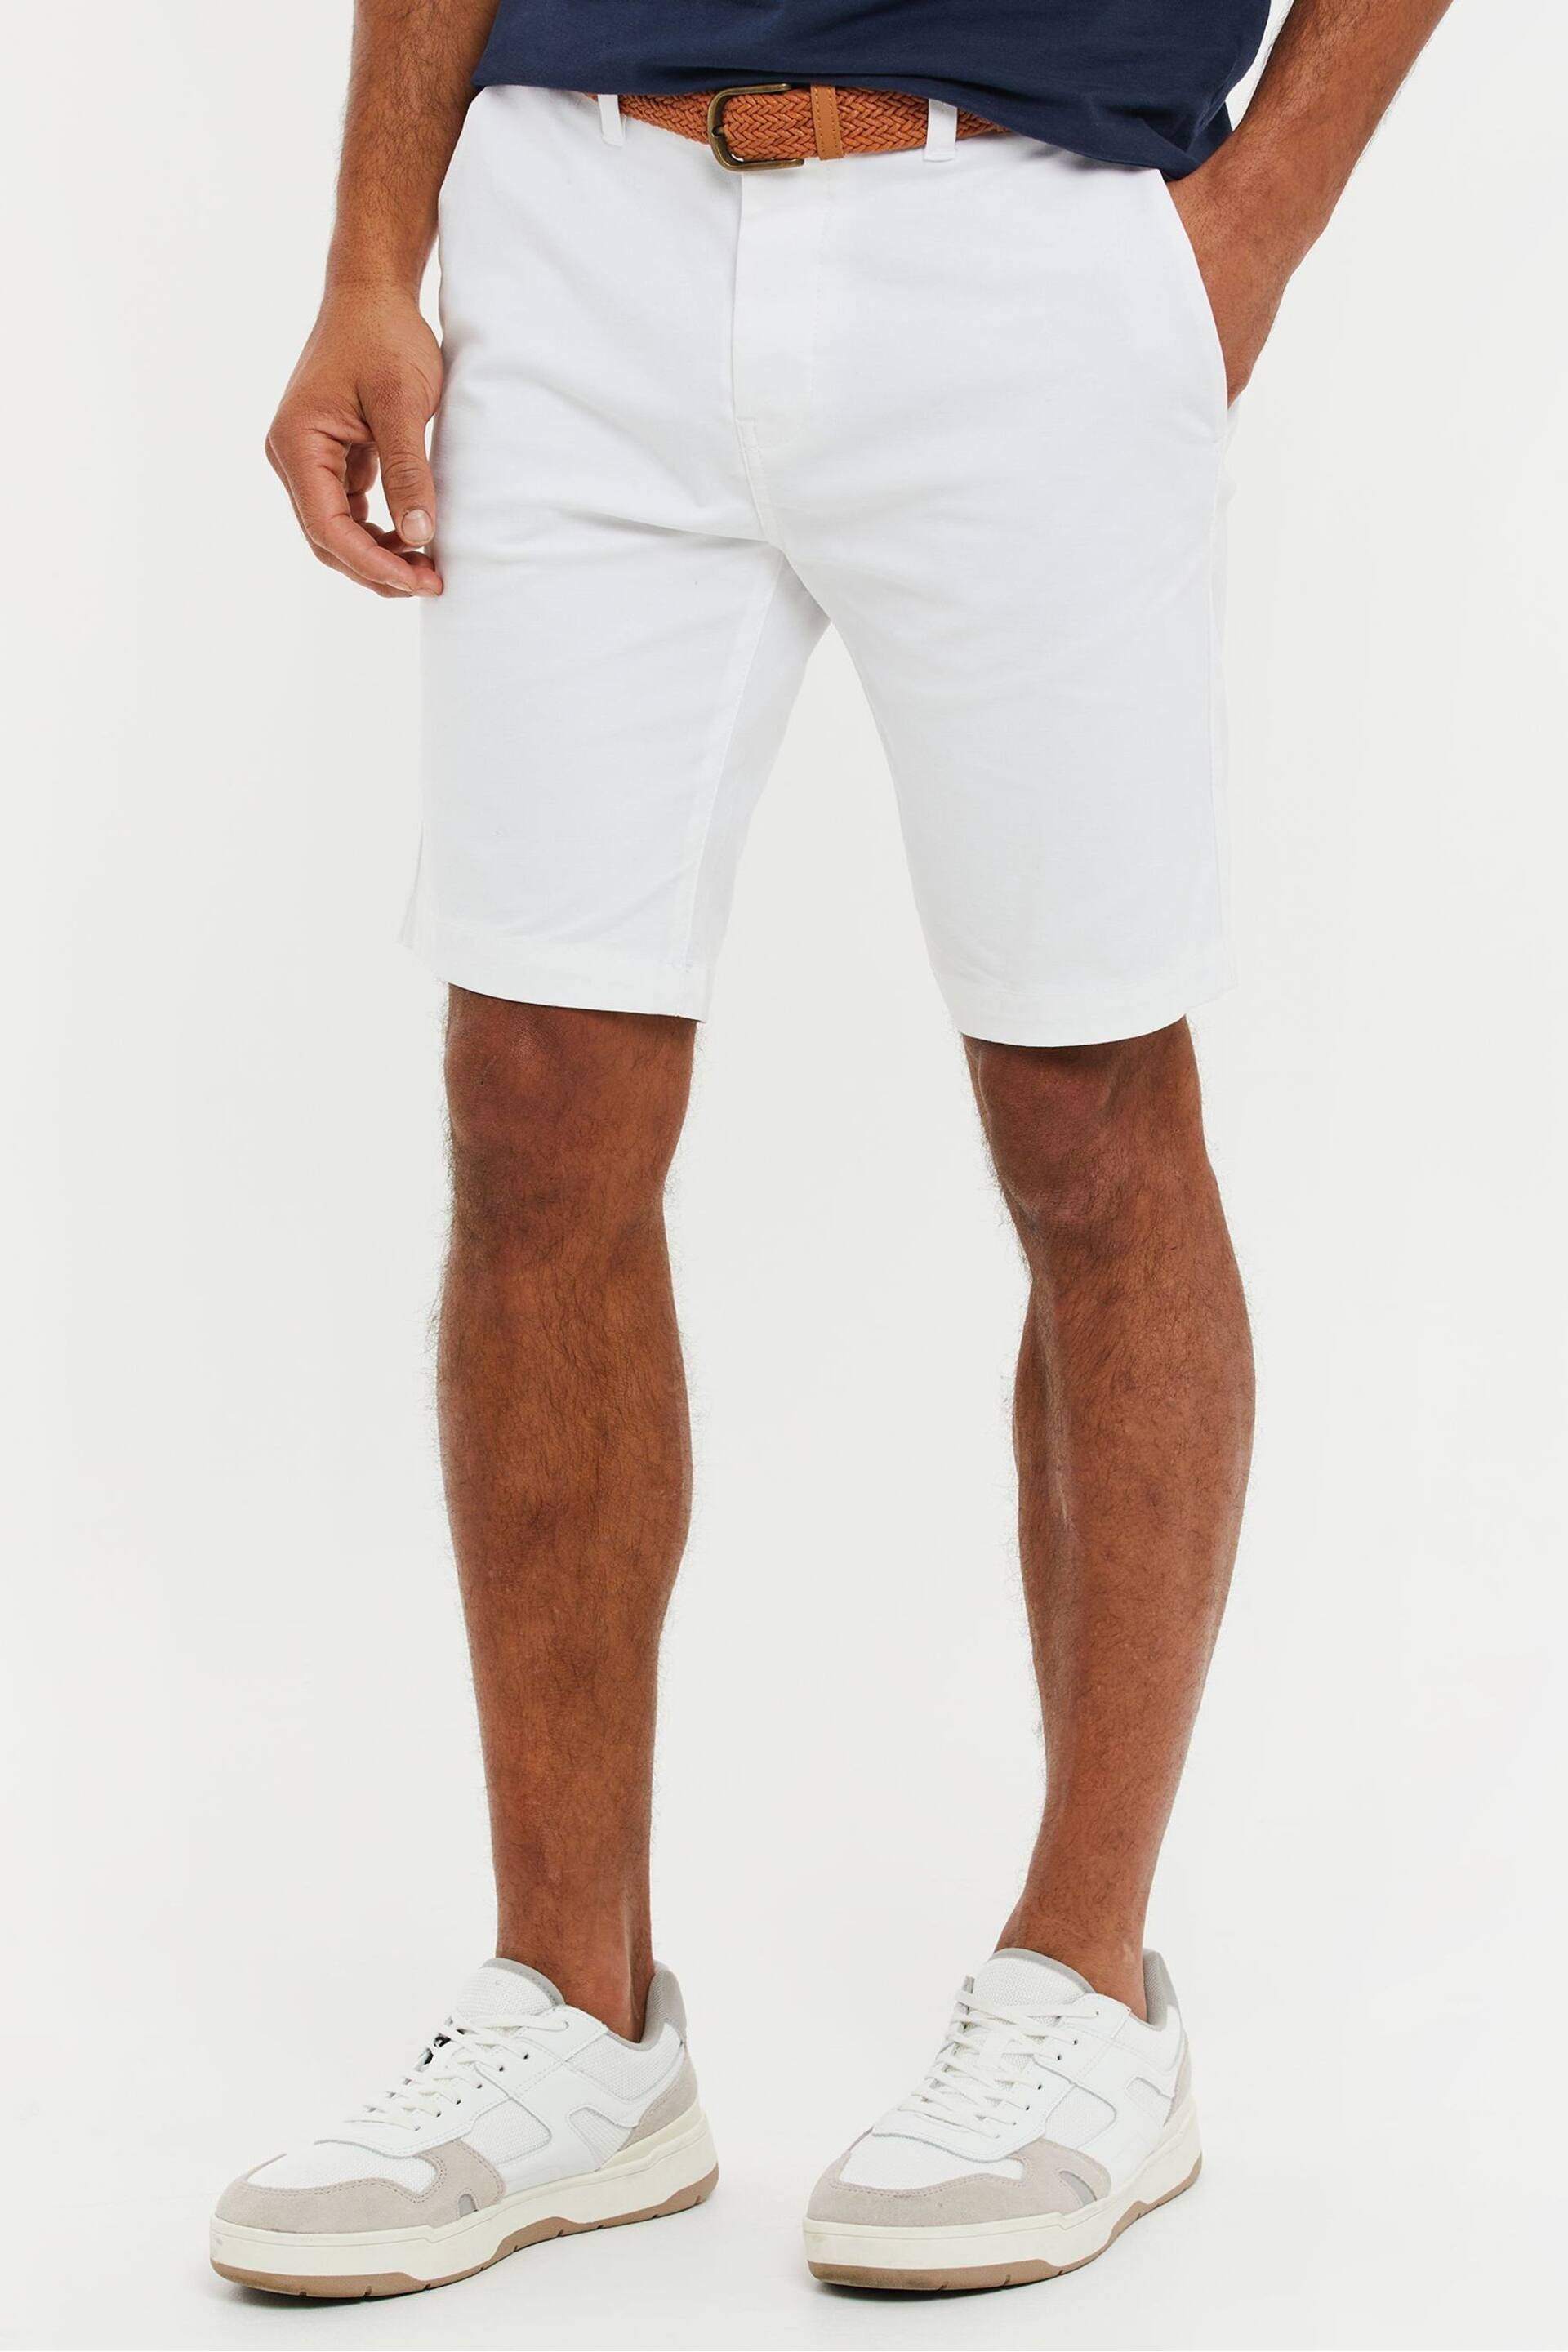 Threadbare White Cotton Stretch Turn-Up Chino Shorts with Woven Belt - Image 1 of 3